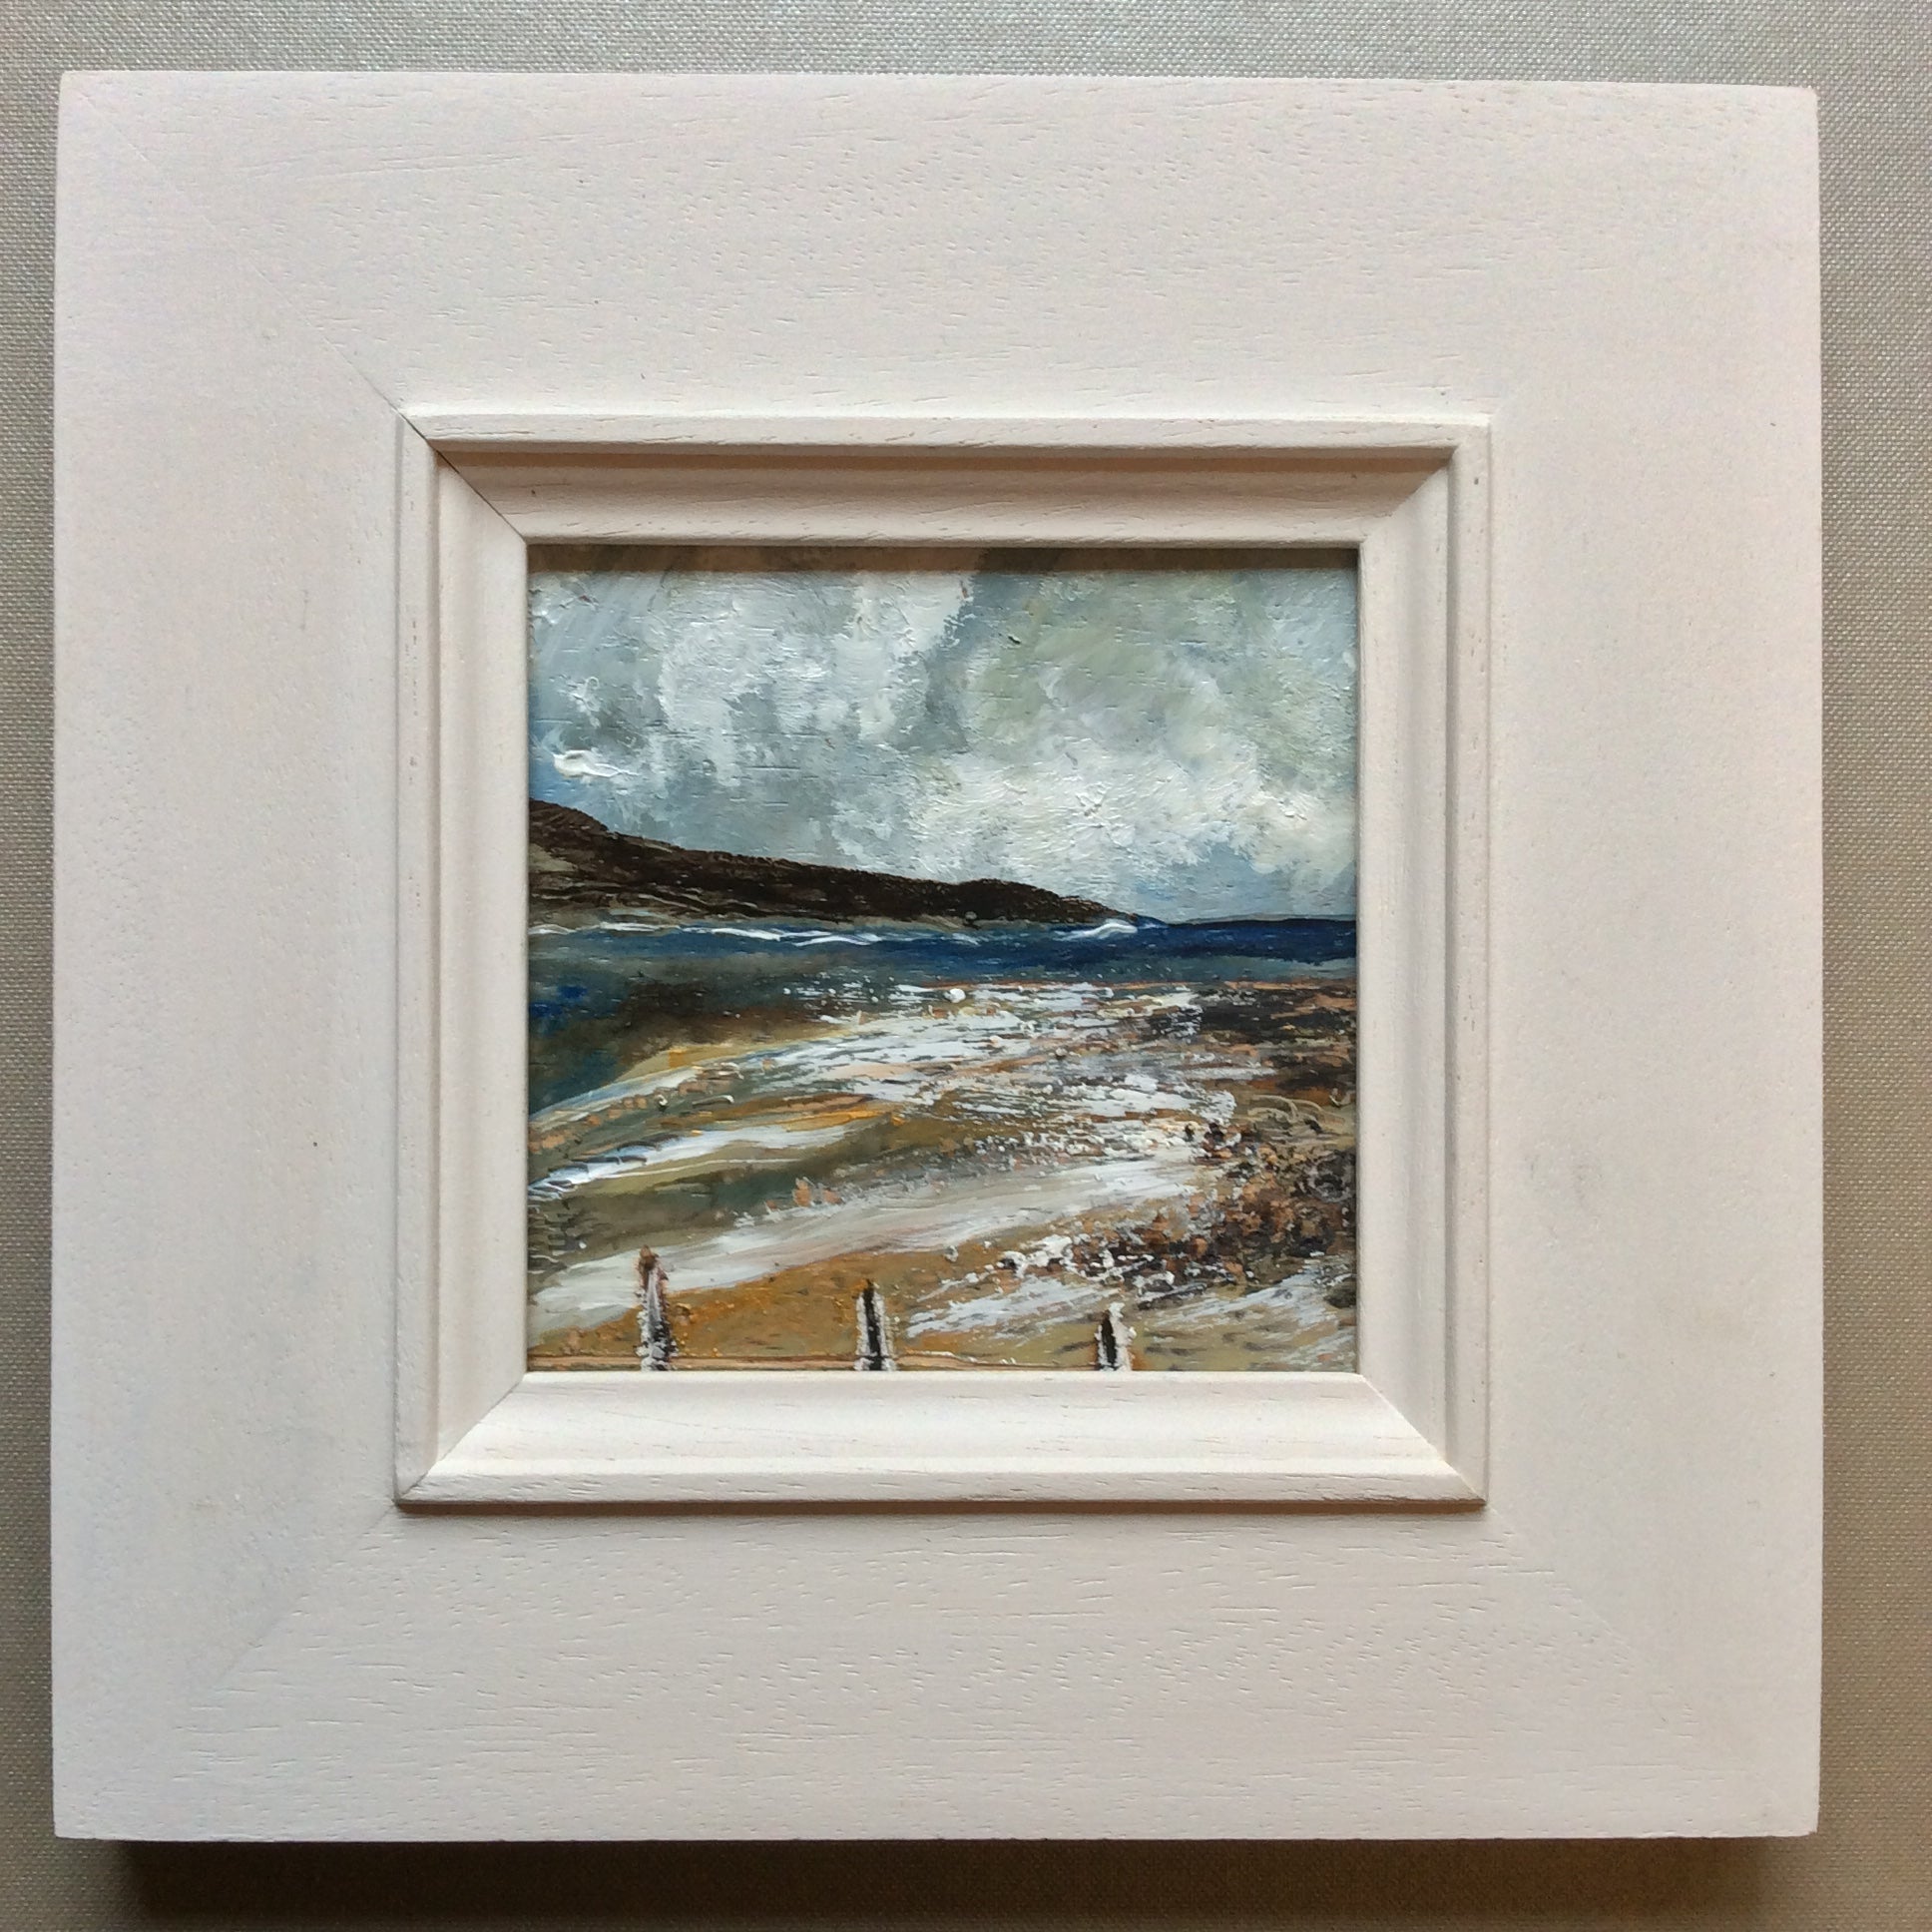 Mixed Media Art on wood By Louise O'Hara - "A shoreline at low tide”